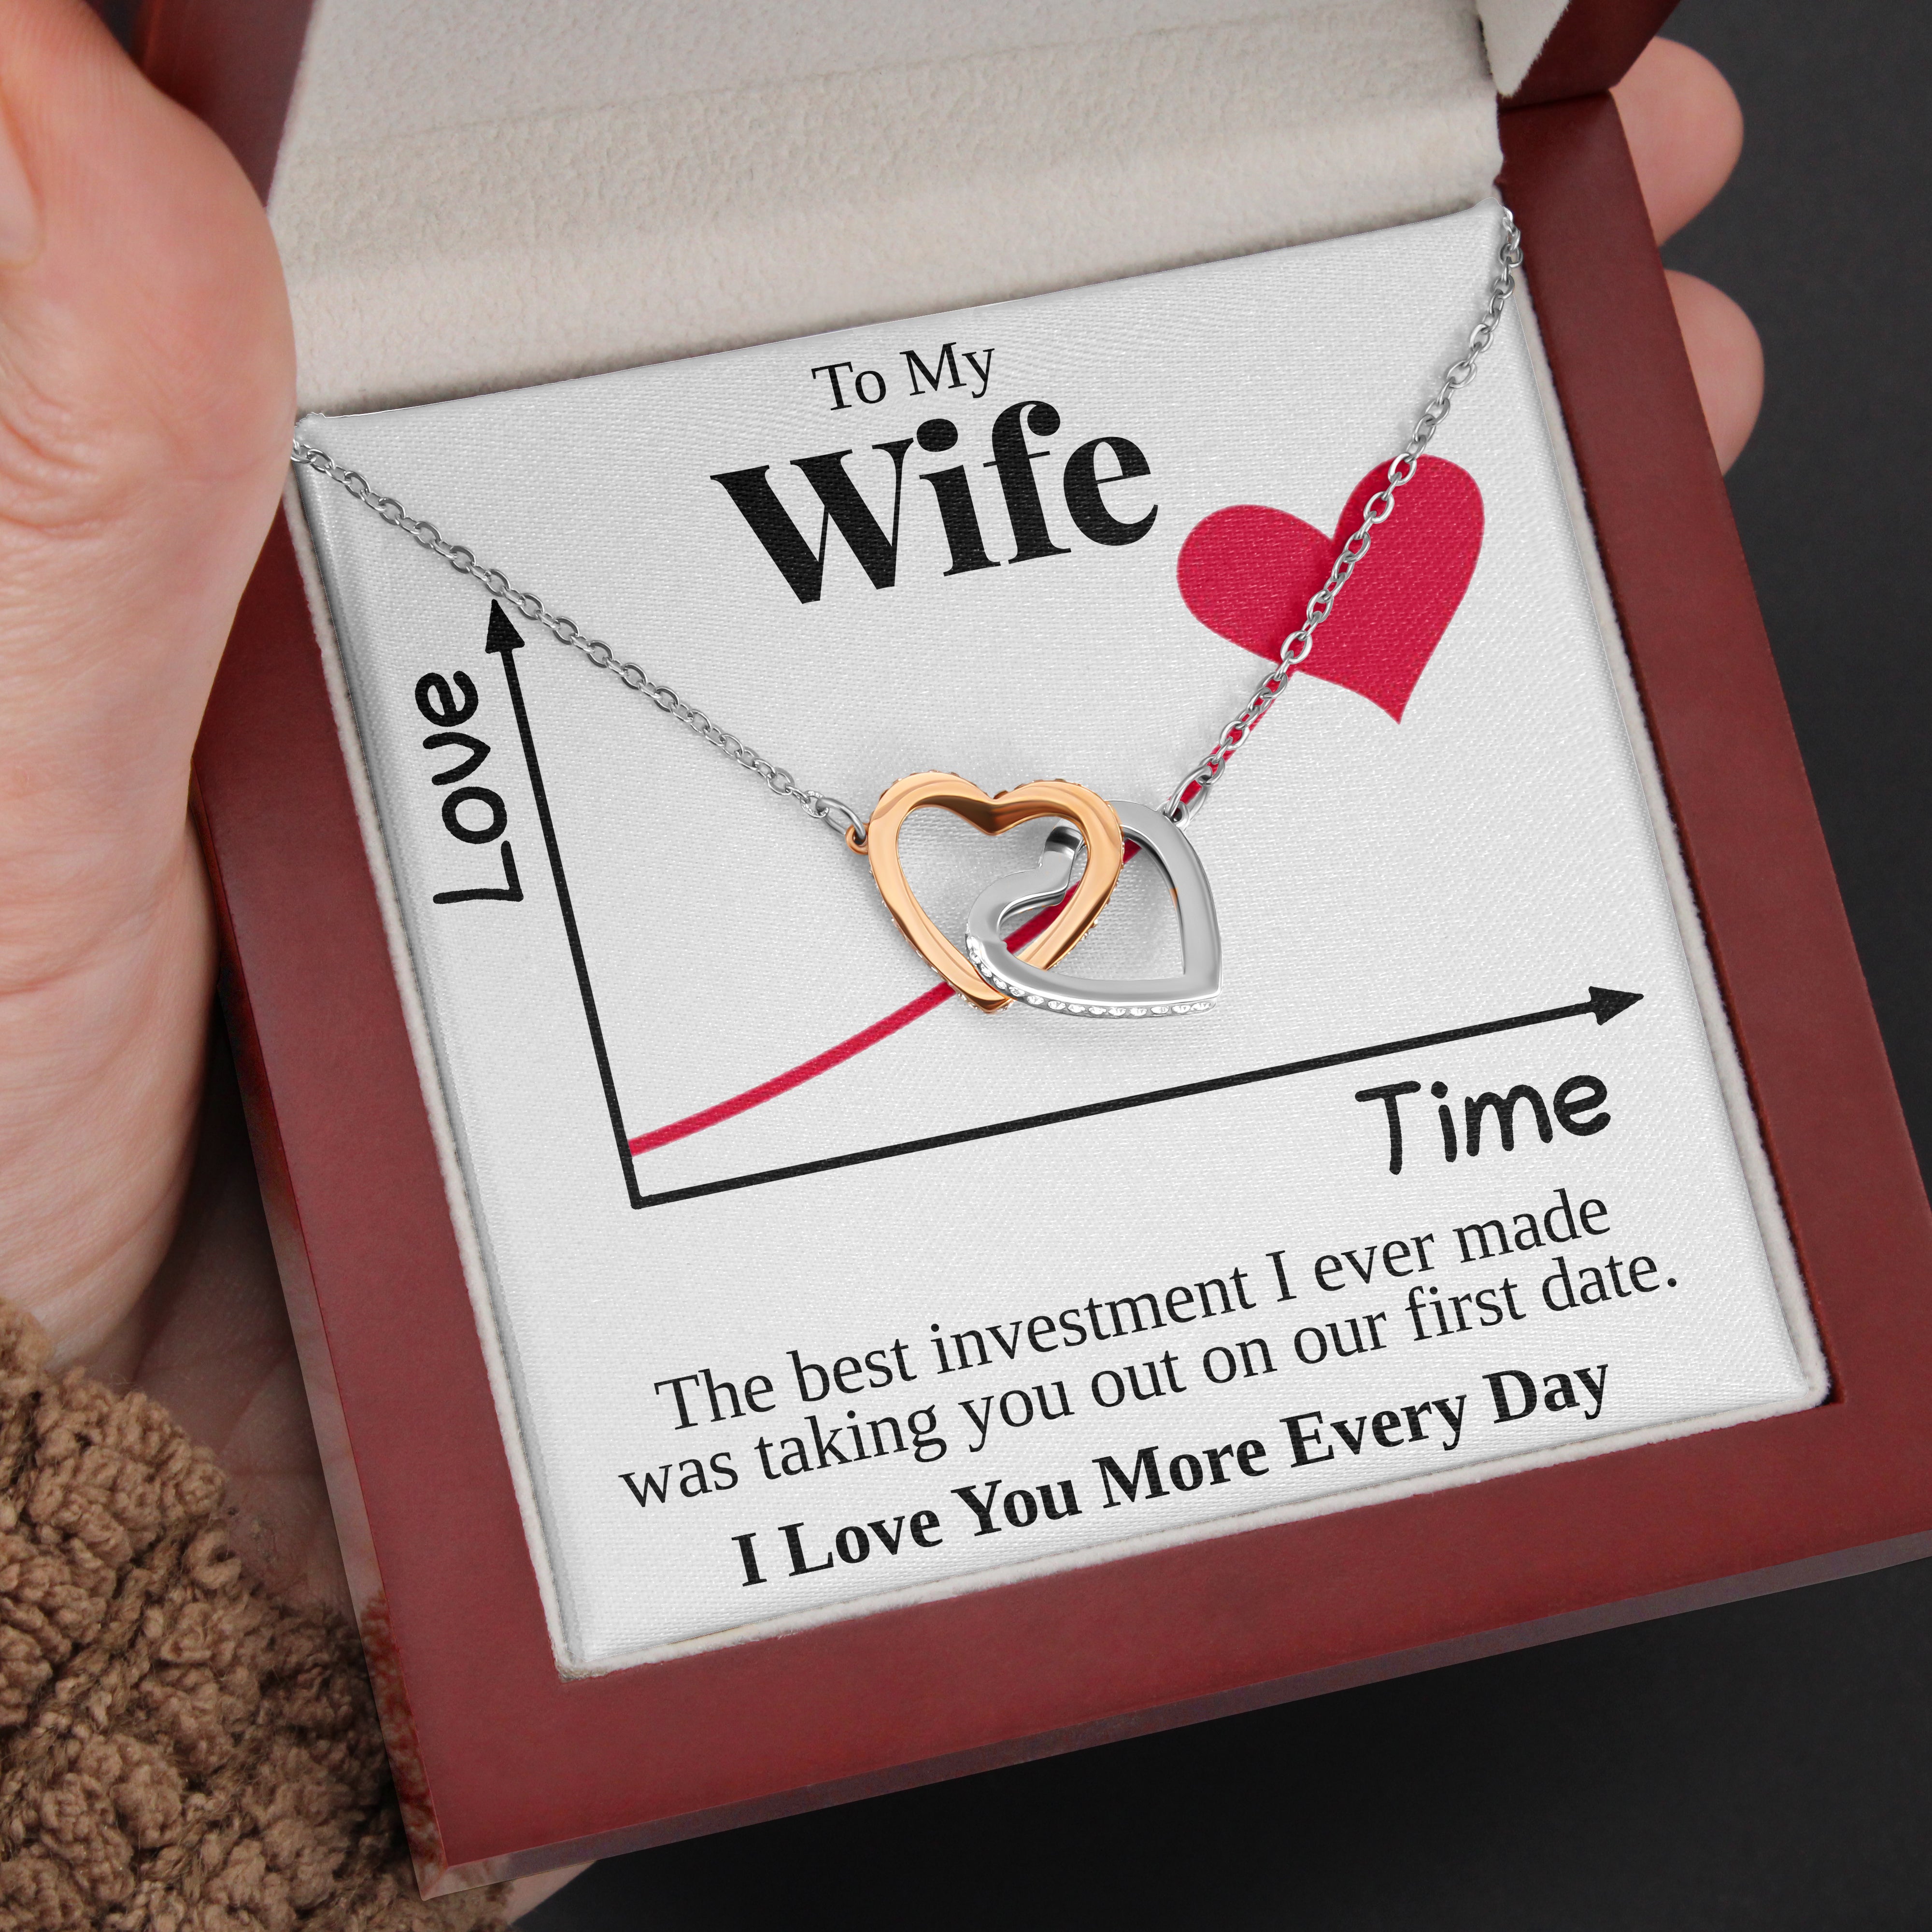 To My Wife | "The Best Investment" | Interlocking Hearts Necklace